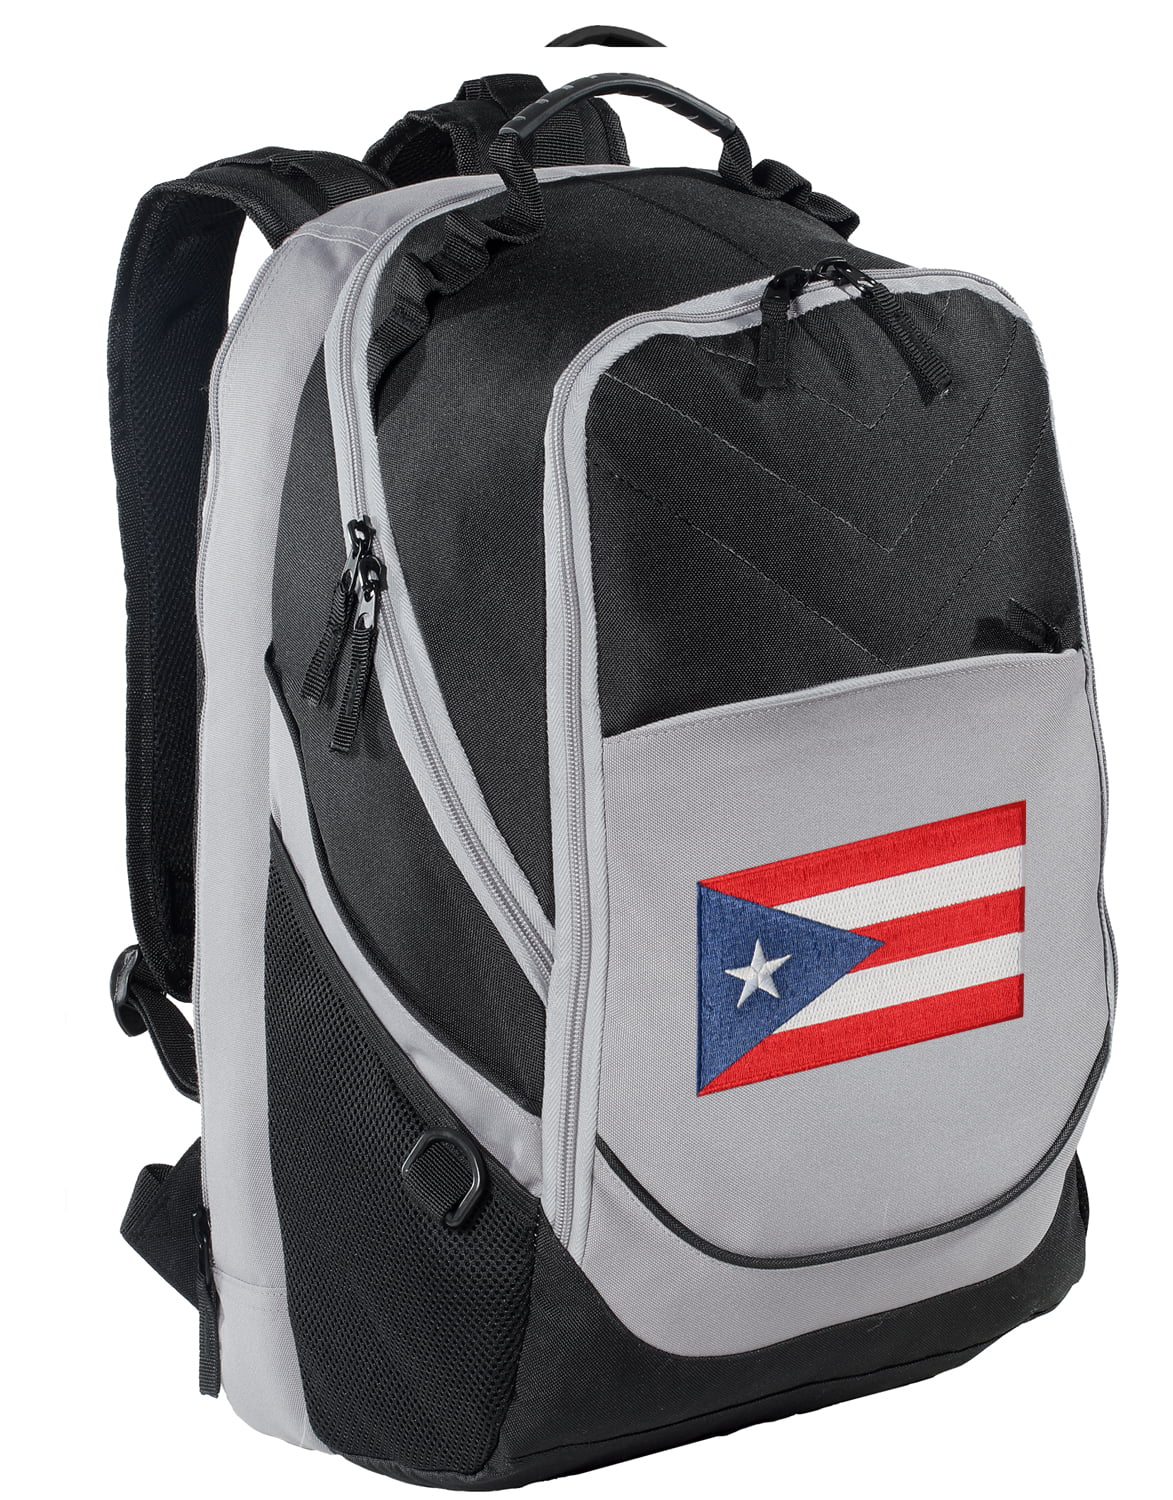 Puerto Rico Flag Backpack Our Best Puerto Rico Laptop Computer Backpack Bag